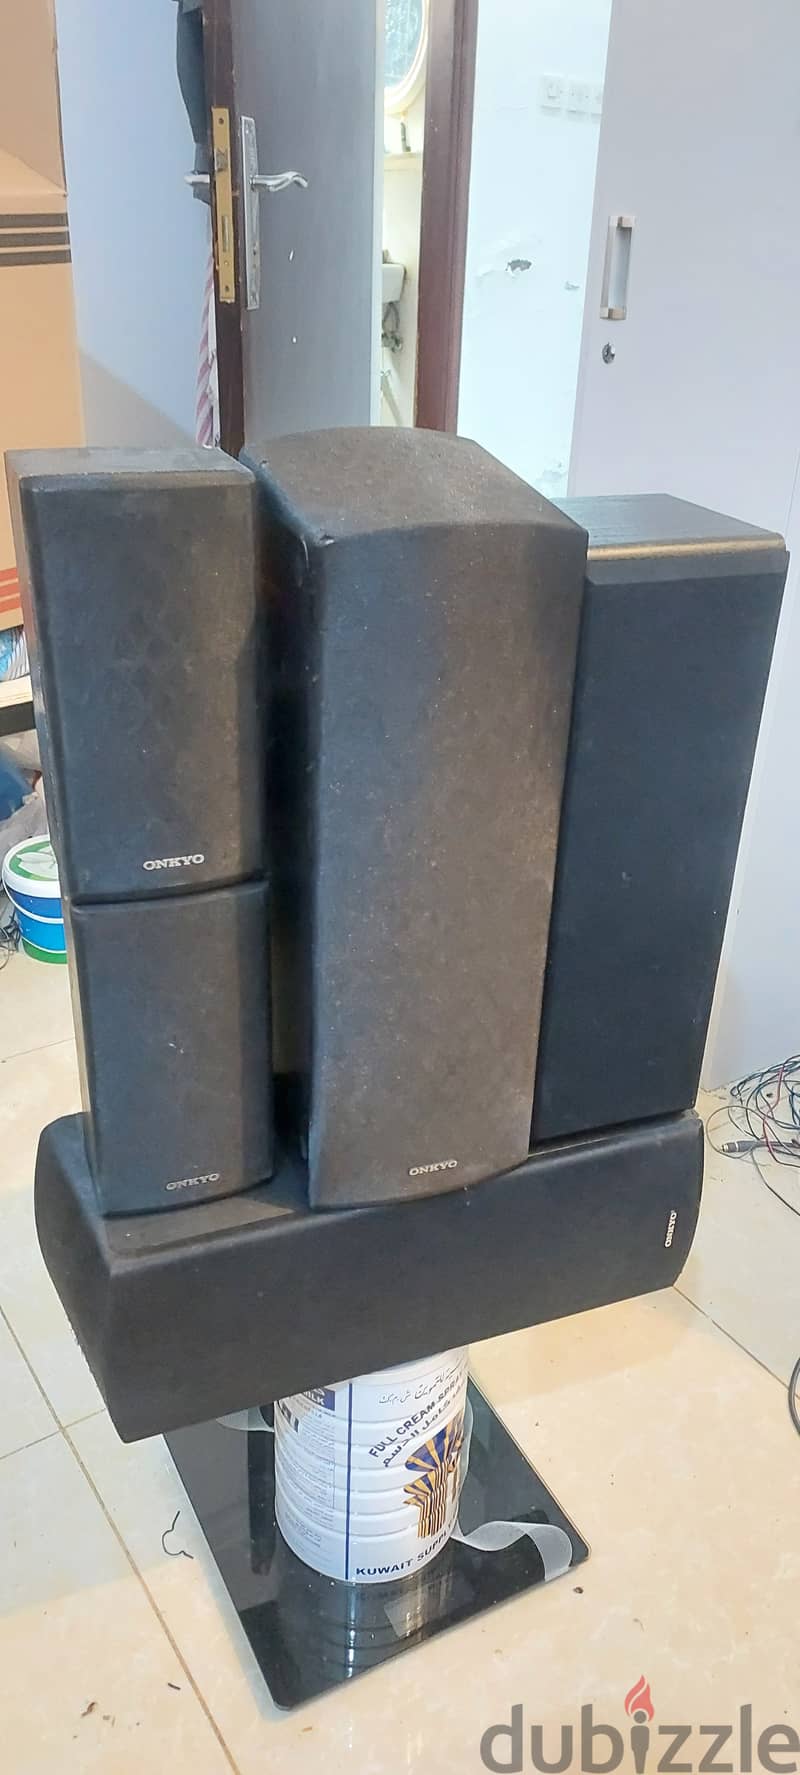 5 pieces of ONKYO Home Theater Speakers (130W 6 Ohm's )for sale. 2